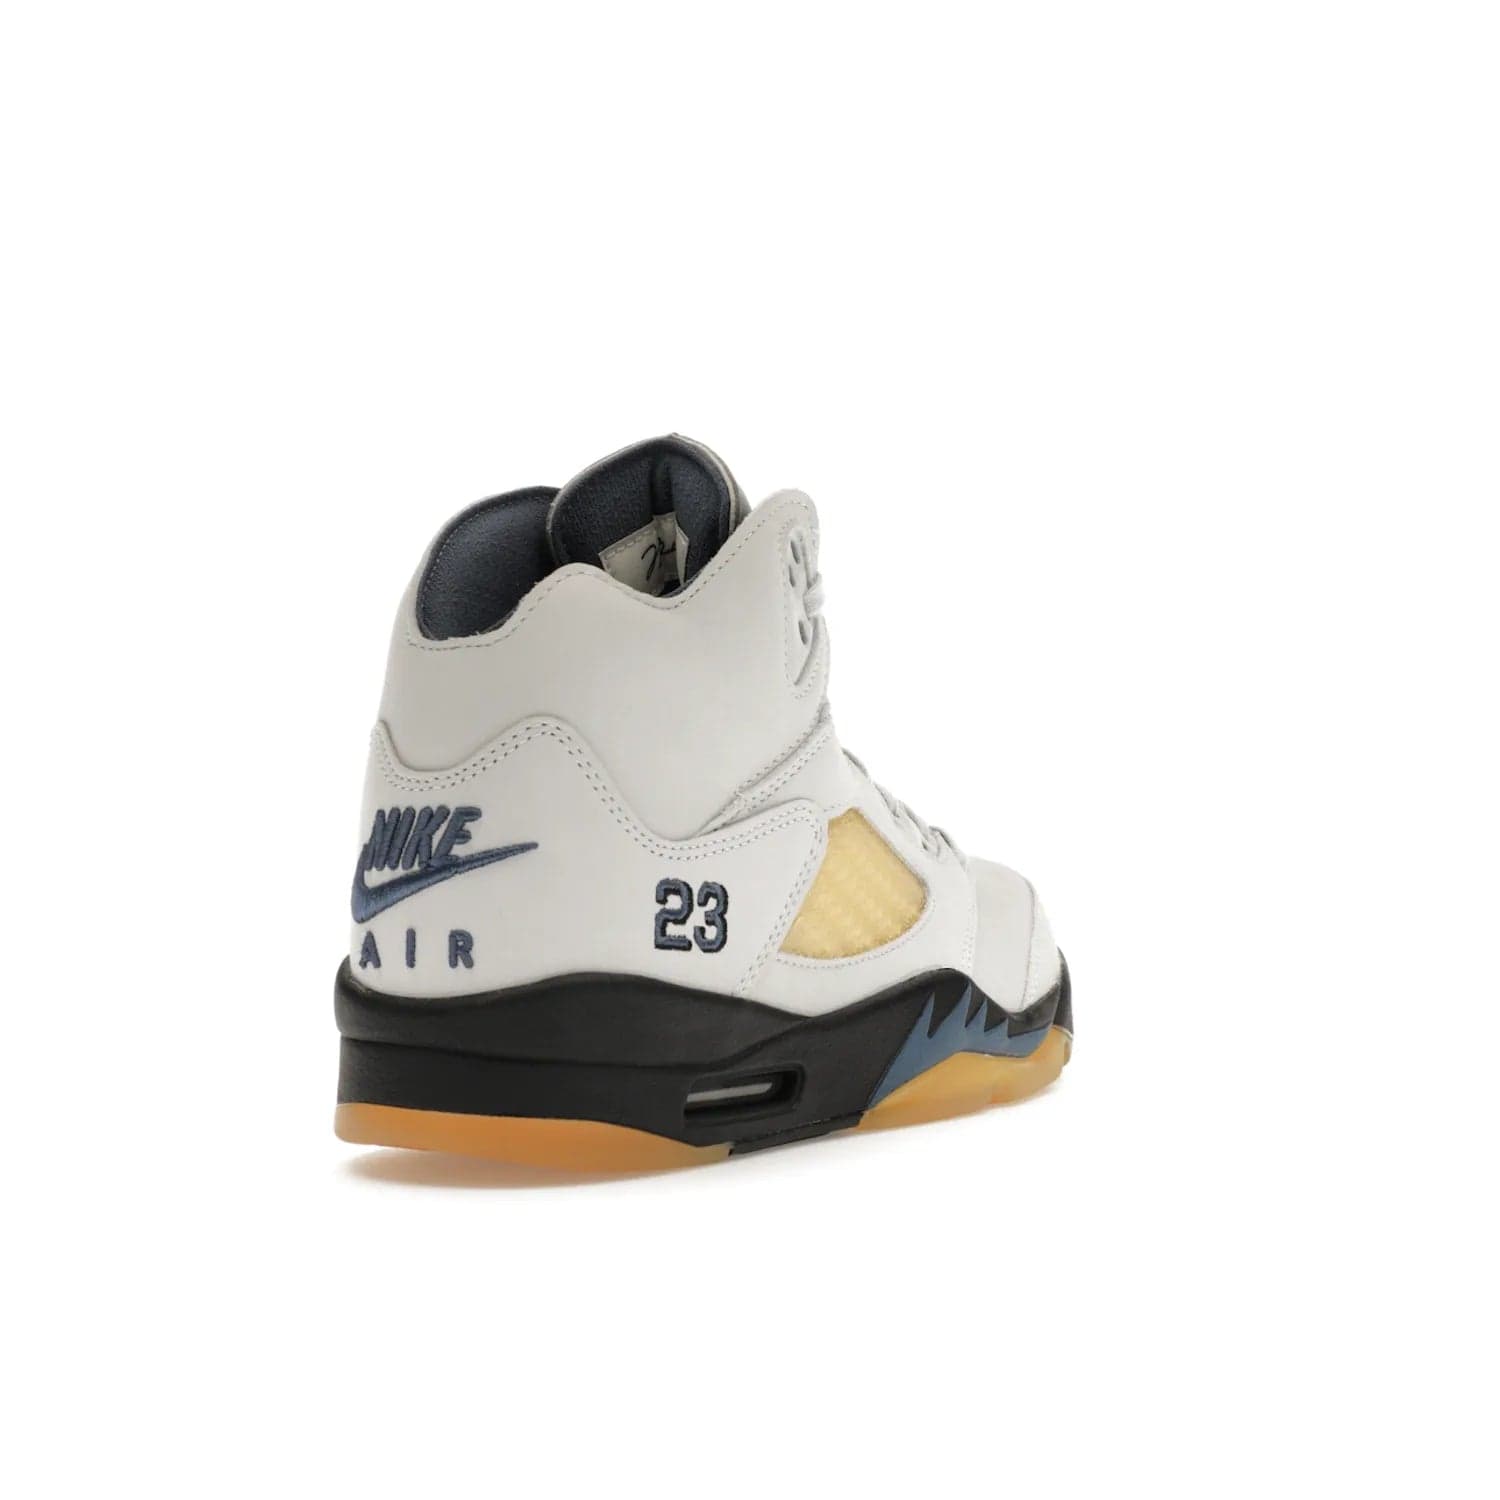 Jordan 5 Retro A Ma Maniére Dawn (Women's) - Image 31 - Only at www.BallersClubKickz.com - Catch the exclusive Air Jordan 5 Retro A Ma Maniére "Dawn" – a modern classic that combines elegance and street style. Get a gleaming metallic silver tongue, the iconic "23" heel, and signature shark teeth pattern. A Photon Dust/Black/Diffused Blue/Pale Ivory colorway, slimmed-down collar, and pre-yellowed quarter panel netting make this sneaker a must-have. Get your pair on November 17 and seize